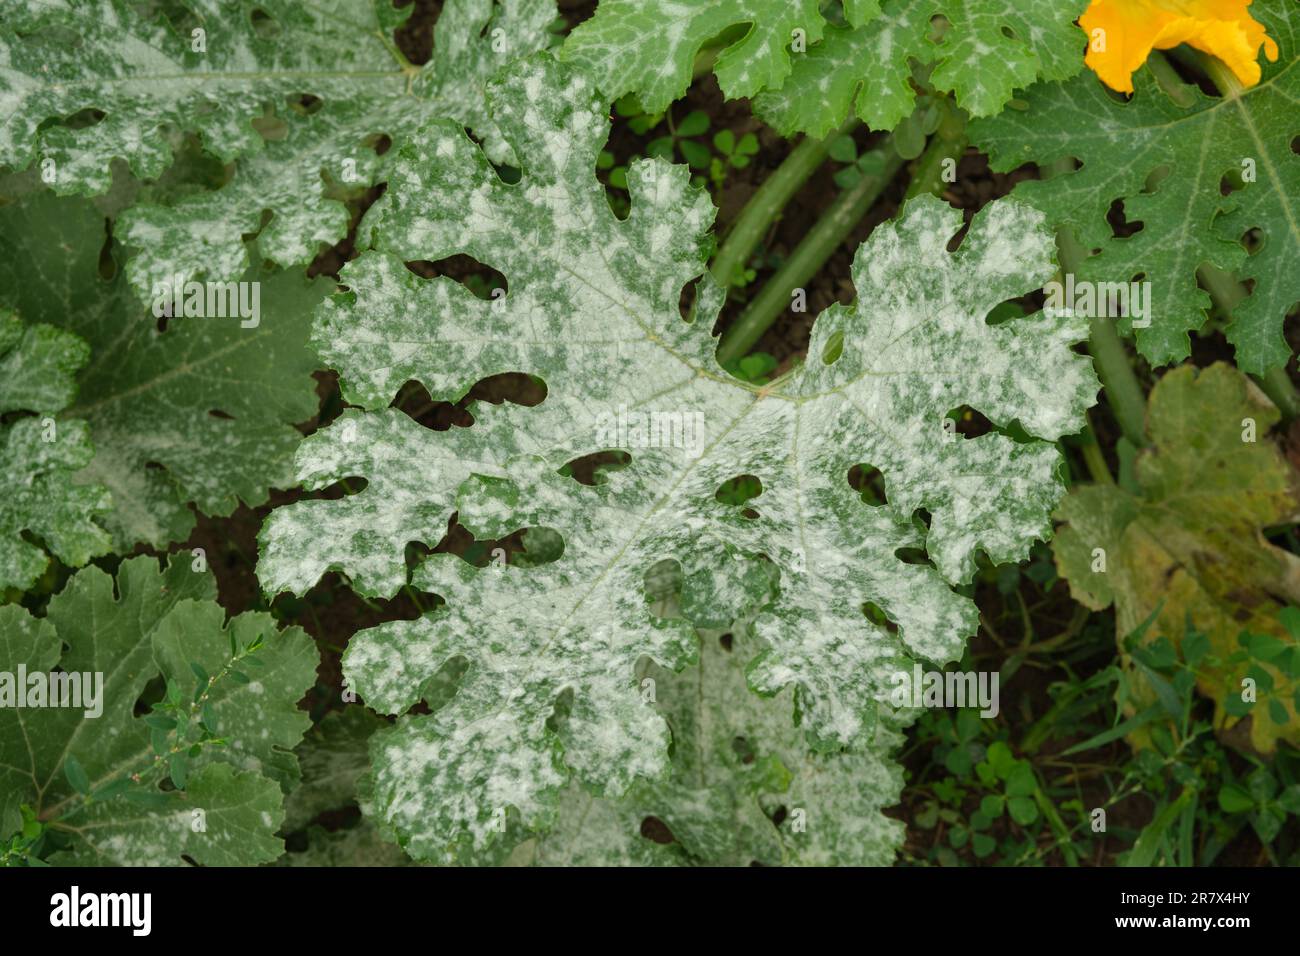 A zucchini leaf is badly affected by the fungal disease Powdery Mildew, sometimes called CPM, or cucurbit powdery mildew. Stock Photo